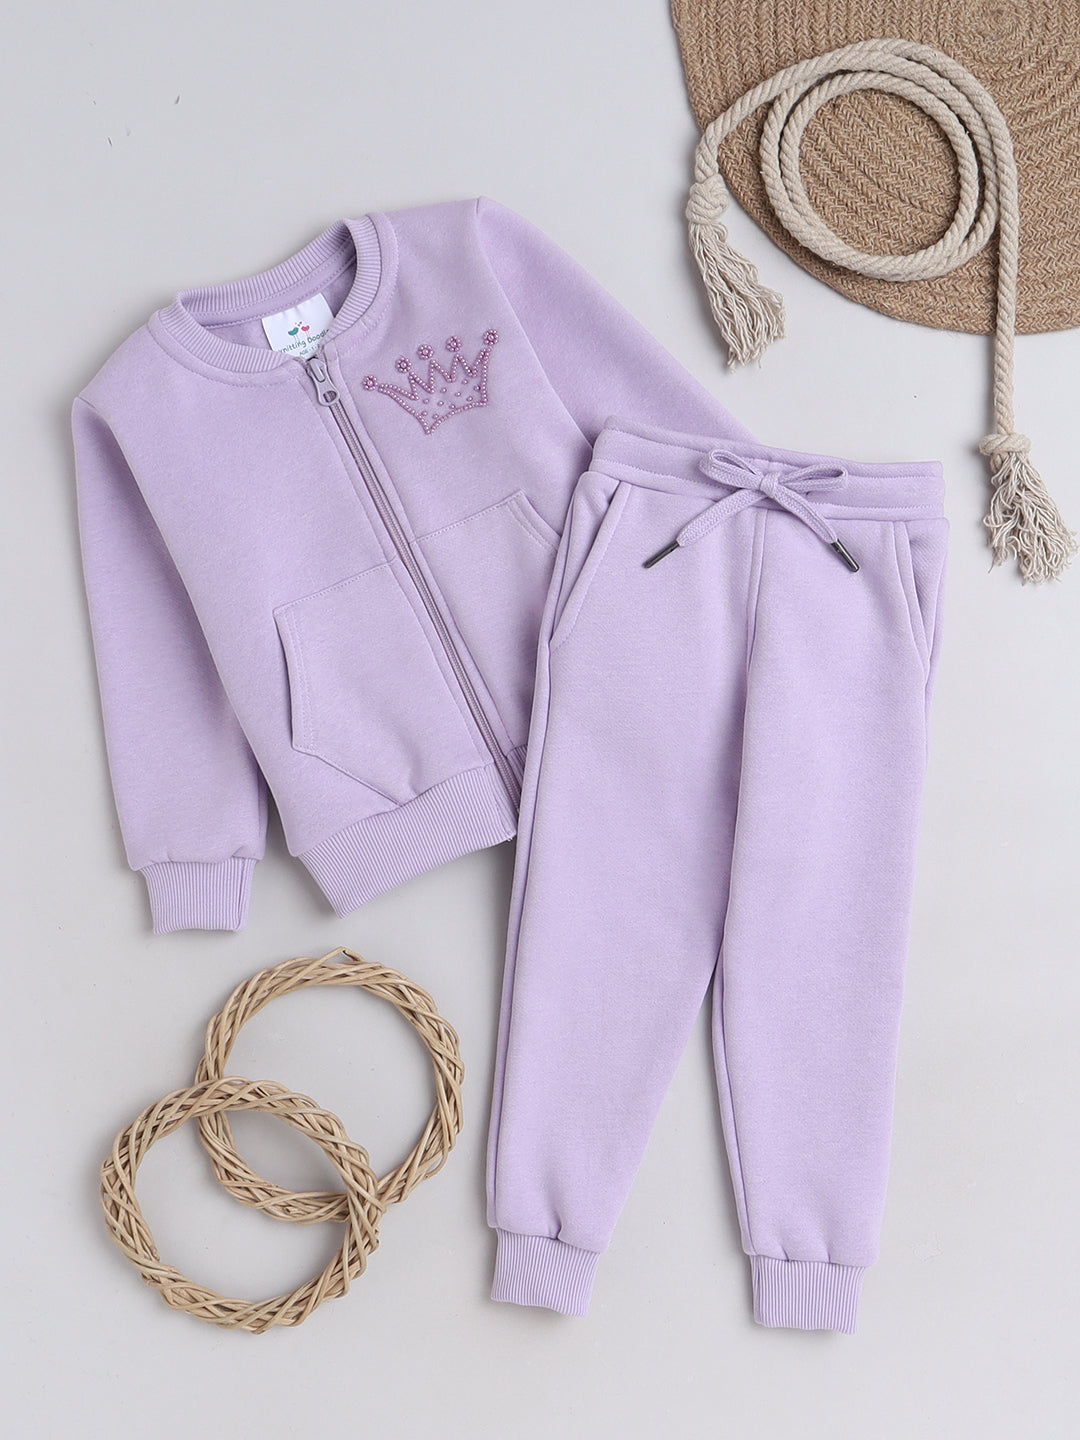 Knitting Doodles Kids' Jogger Set with Warm Fleece and Pretty Crown Detailing- Purple